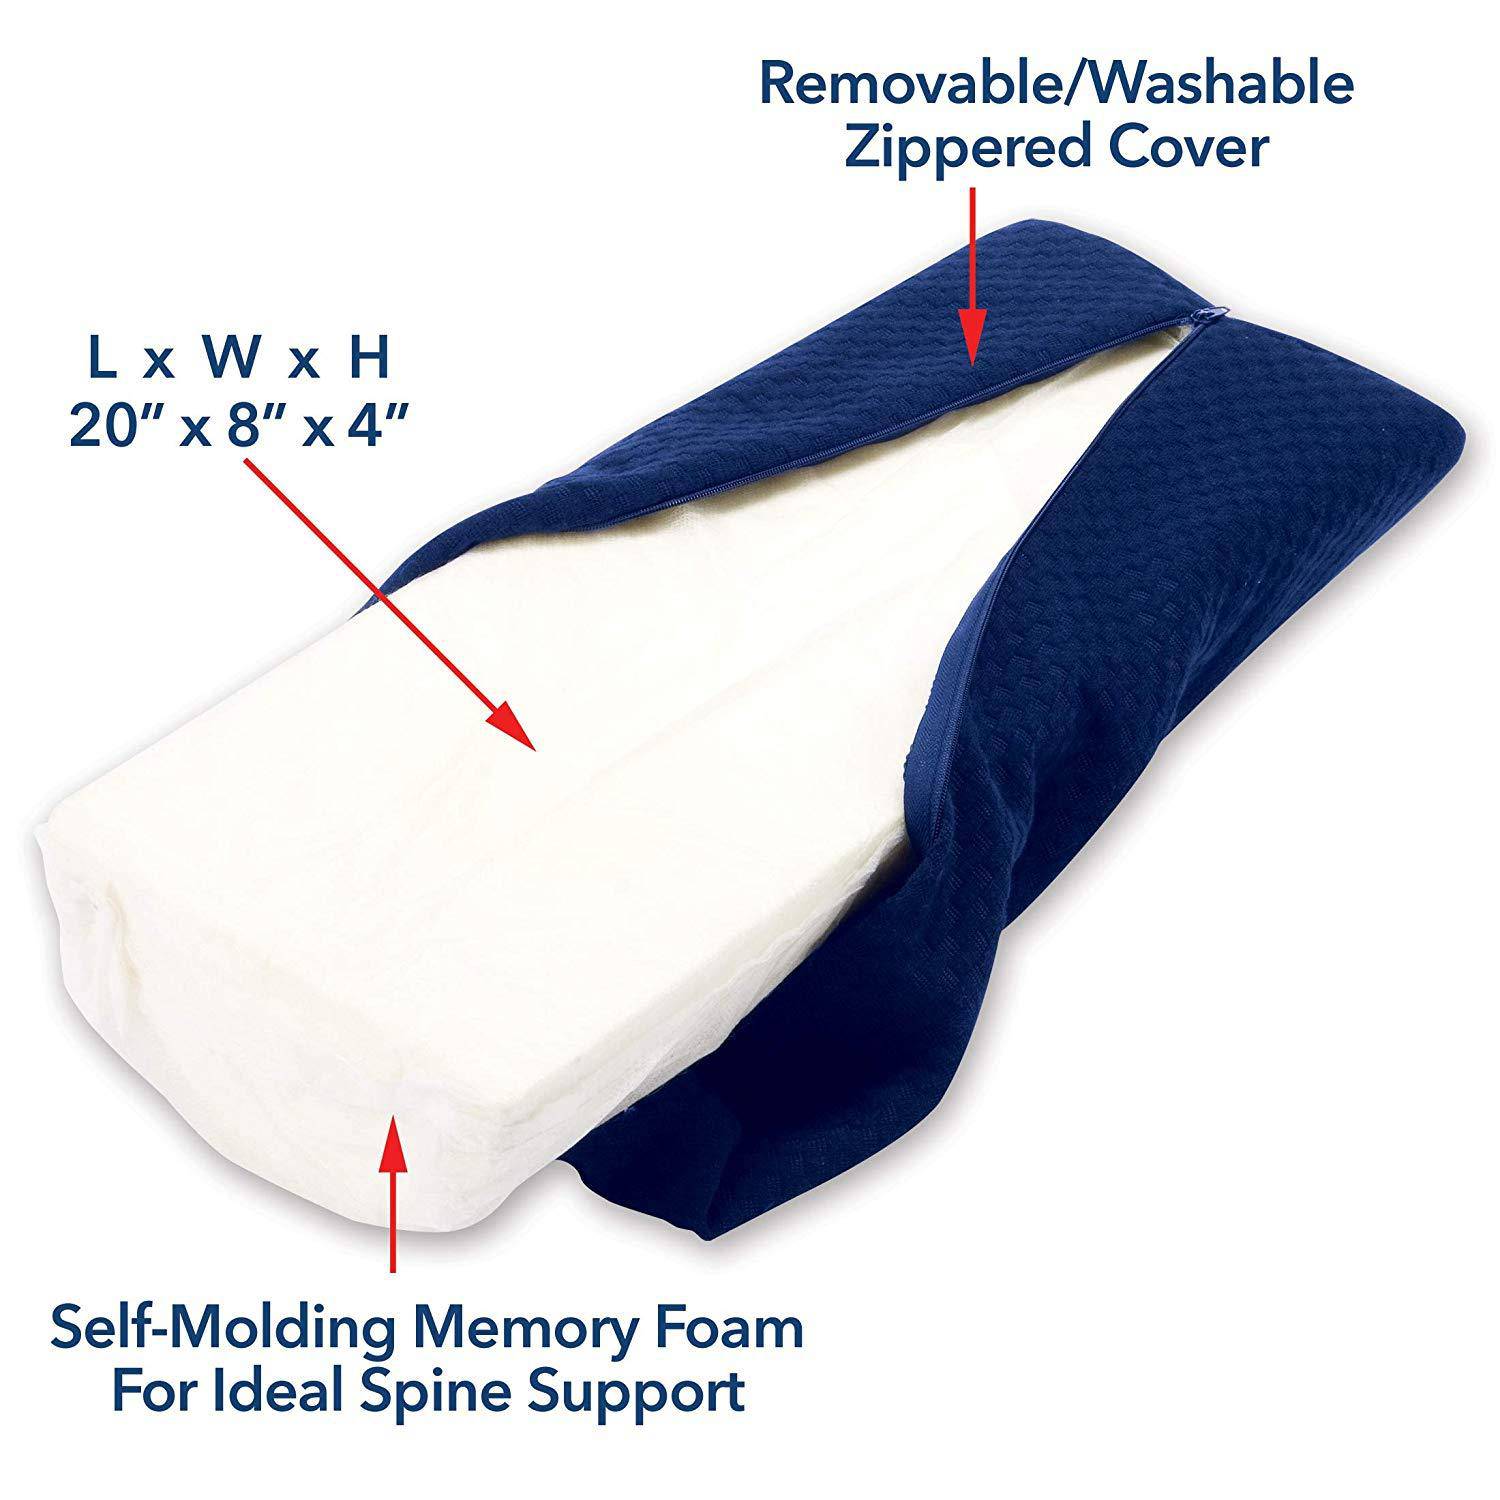 Carex Bed Wedge Pillow for Sleeping